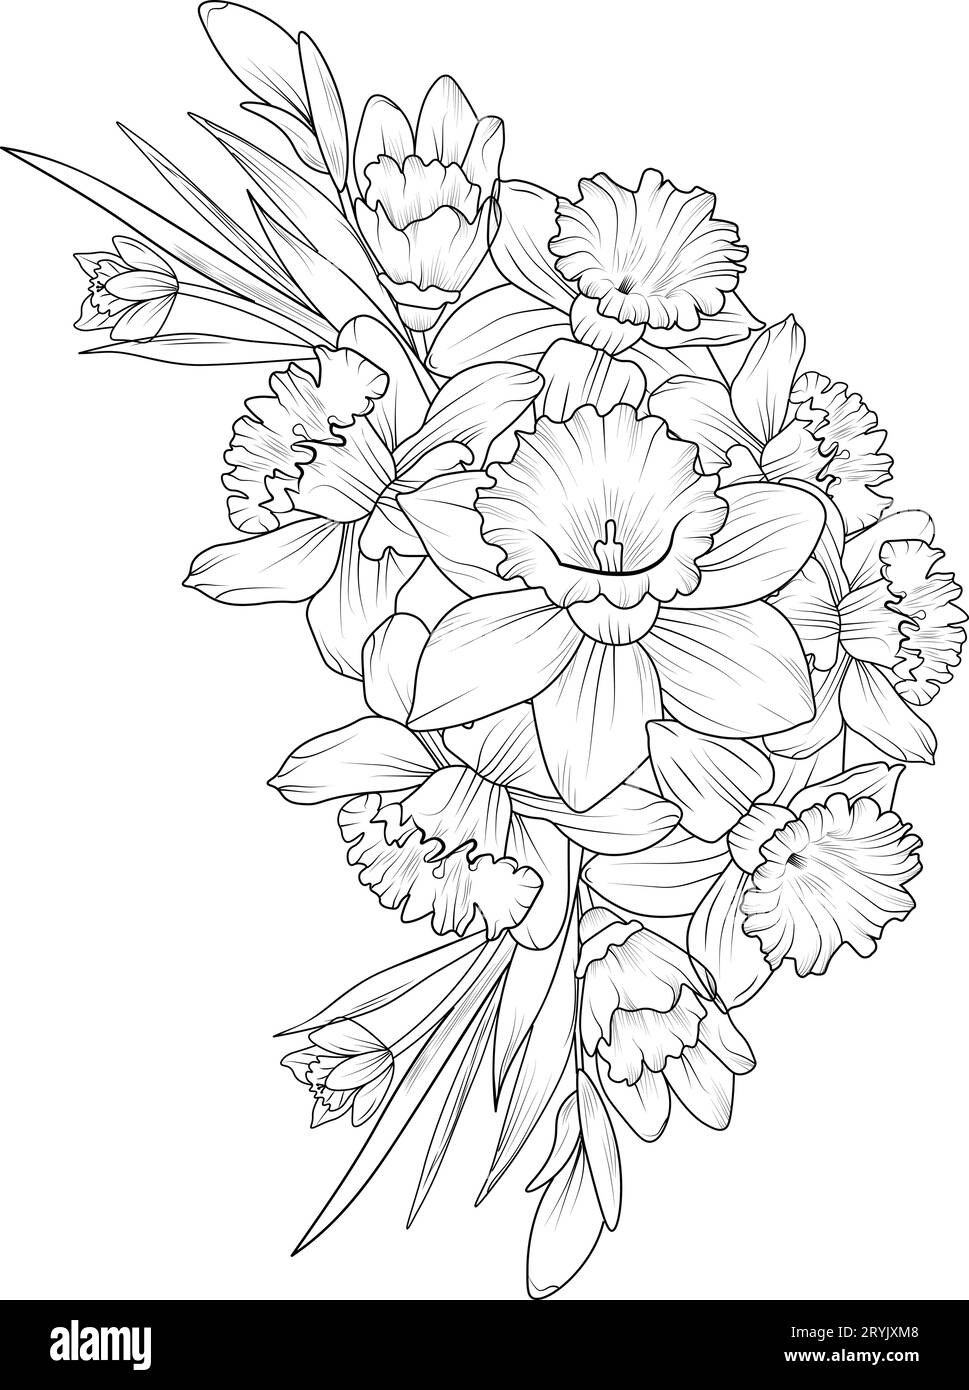 Dffodil flower coloring pages, daffodil drawings, yellow daffodil ...